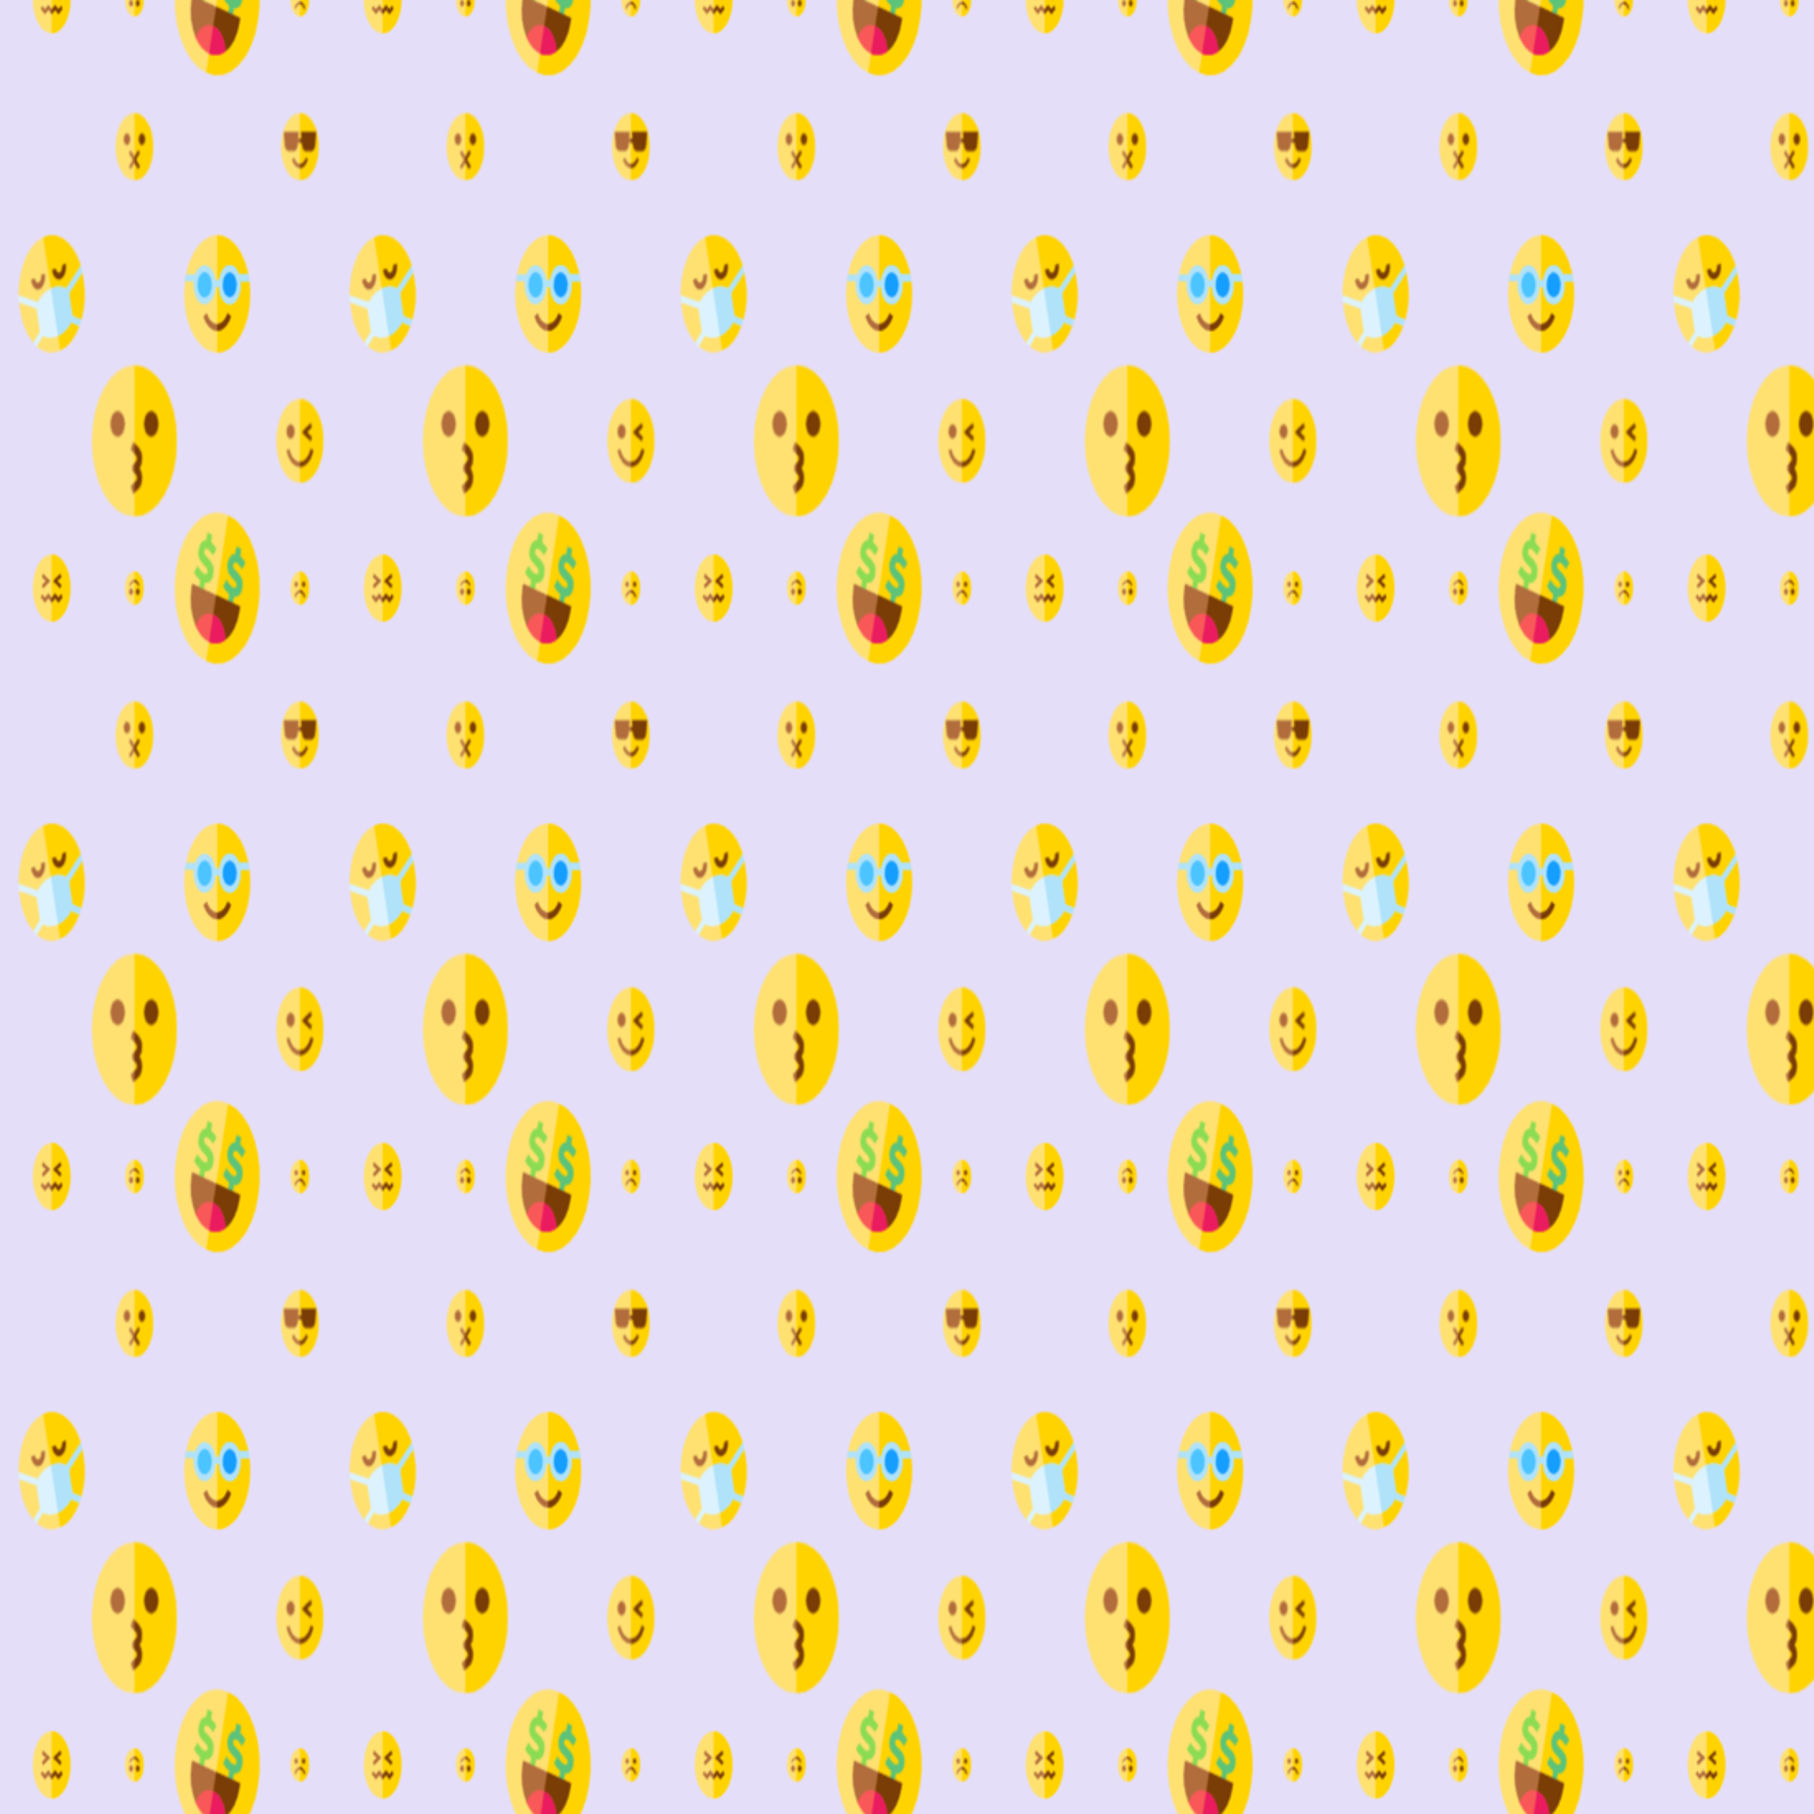 "Express Yourself: A Playful 10 Emoji Pattern Design" preview image.